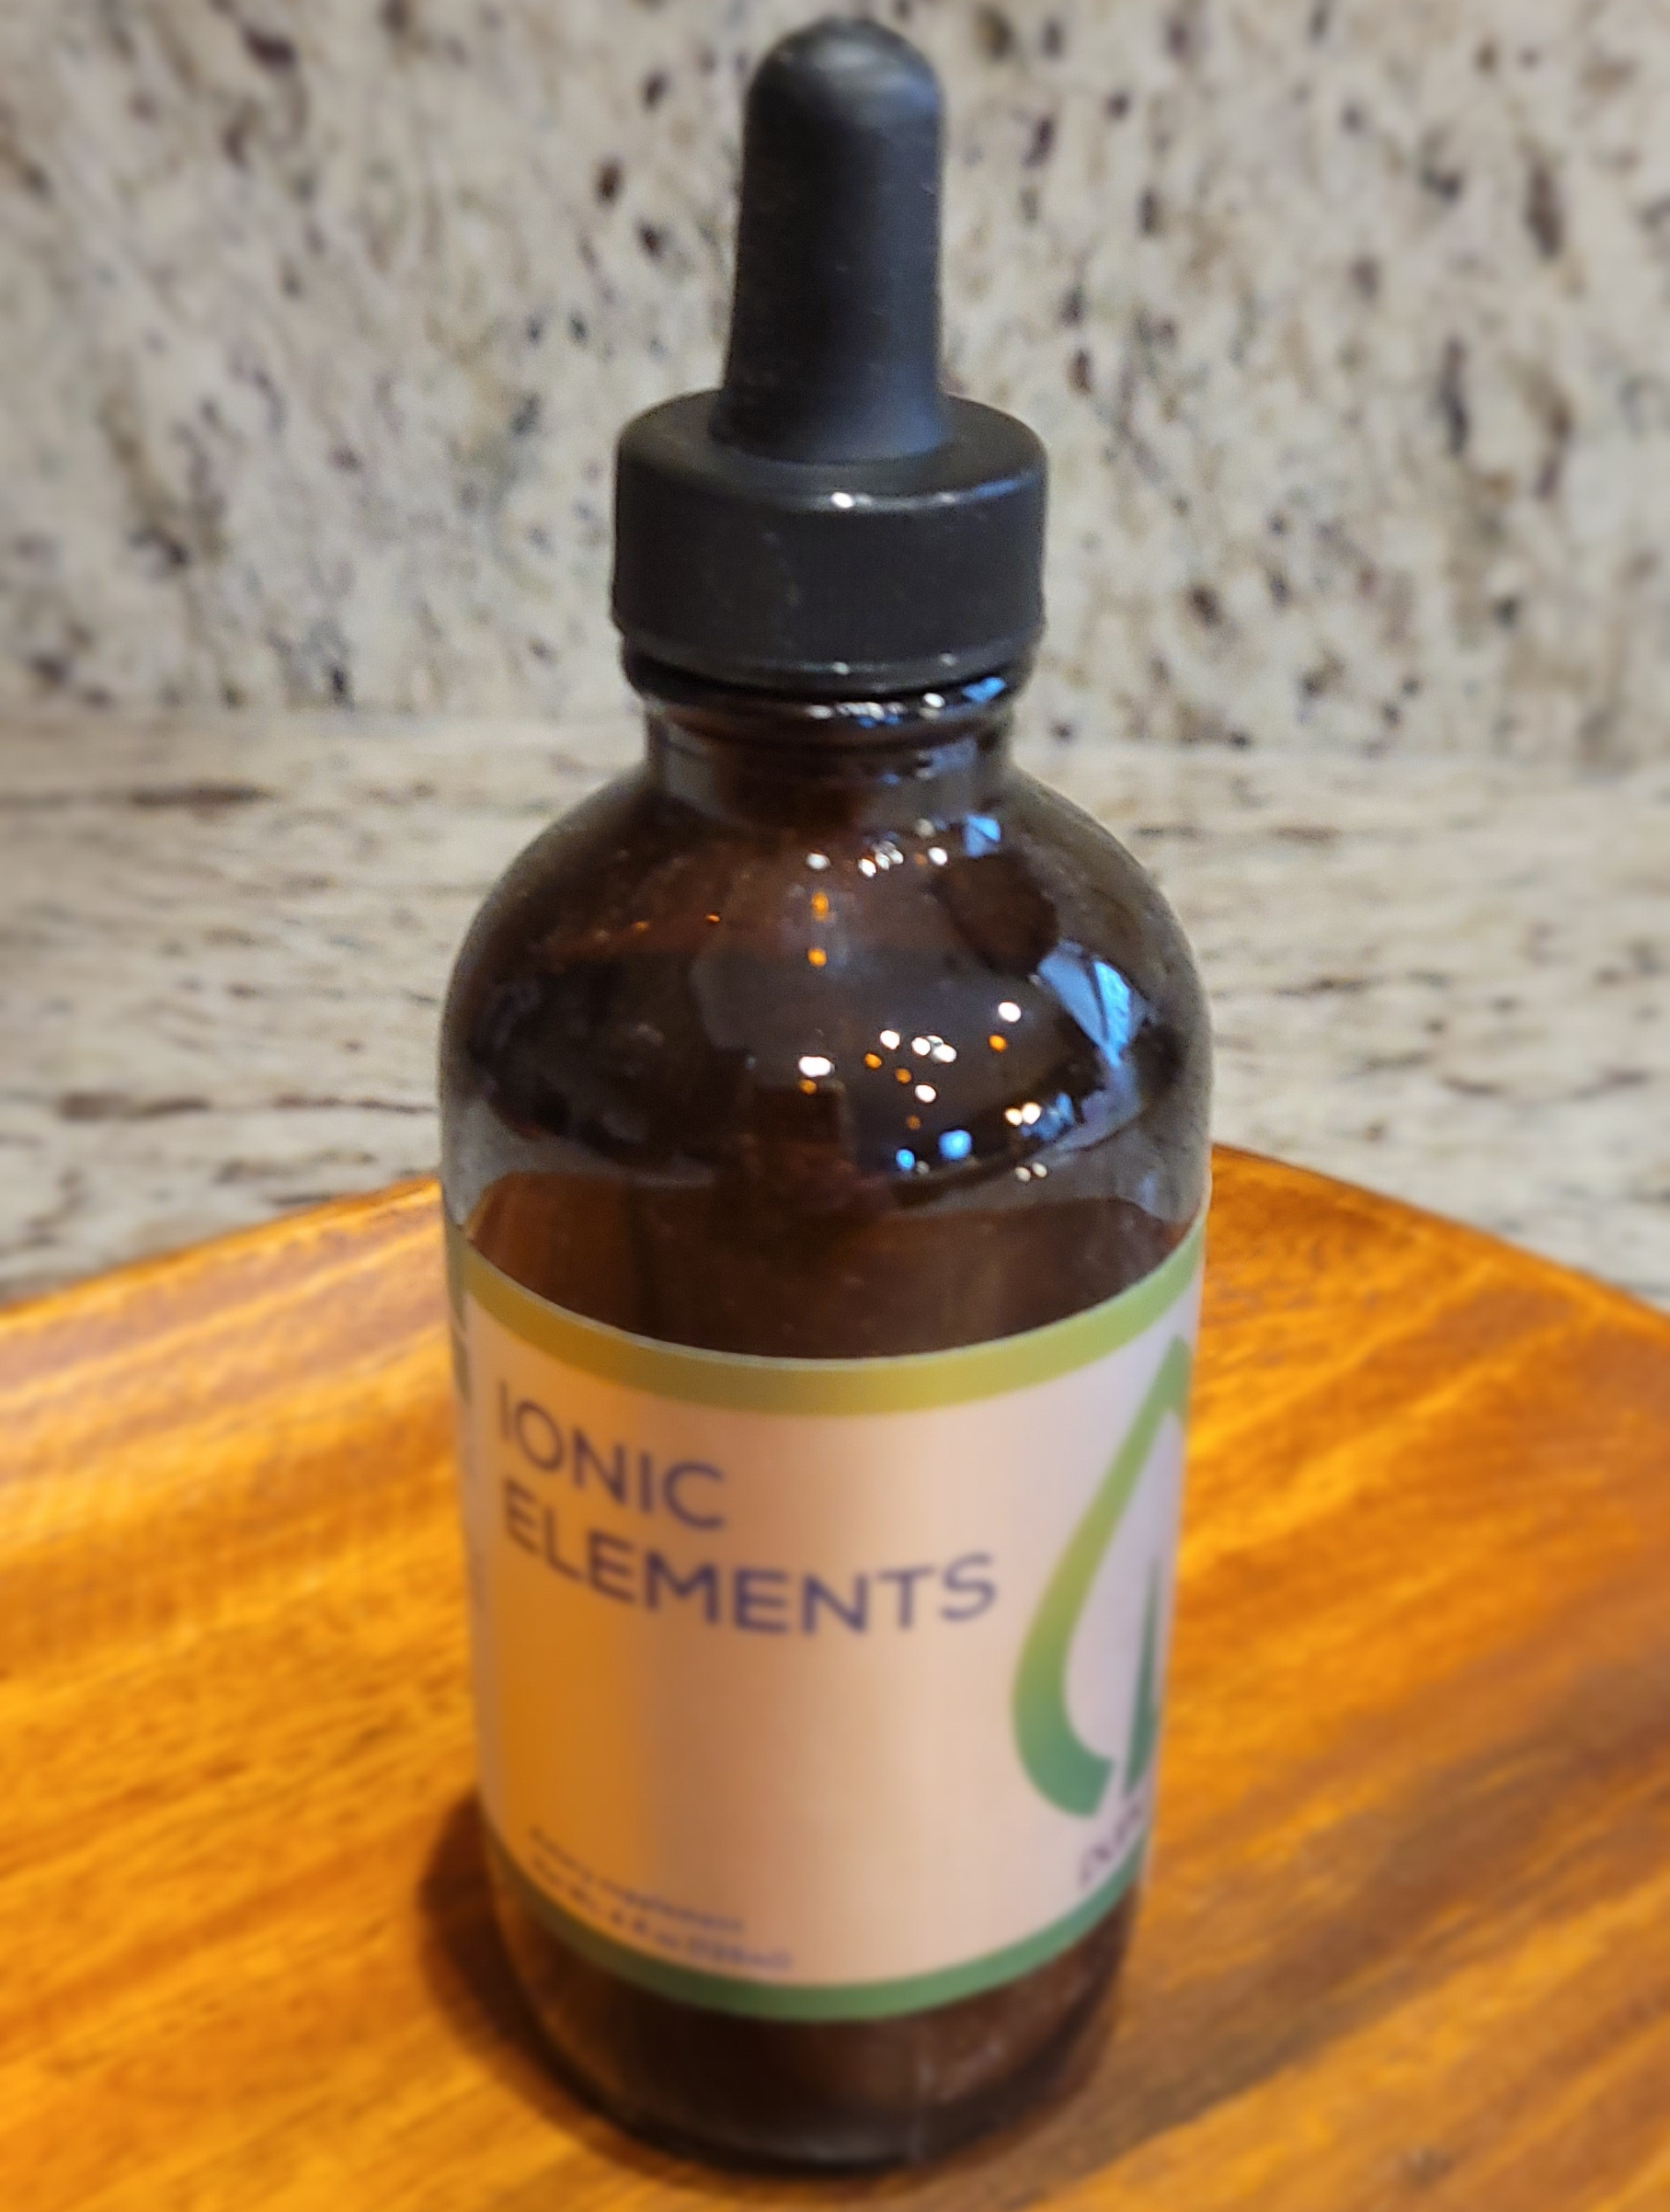 Ionic Elements: What to Know About Purium’s Synergistic Product